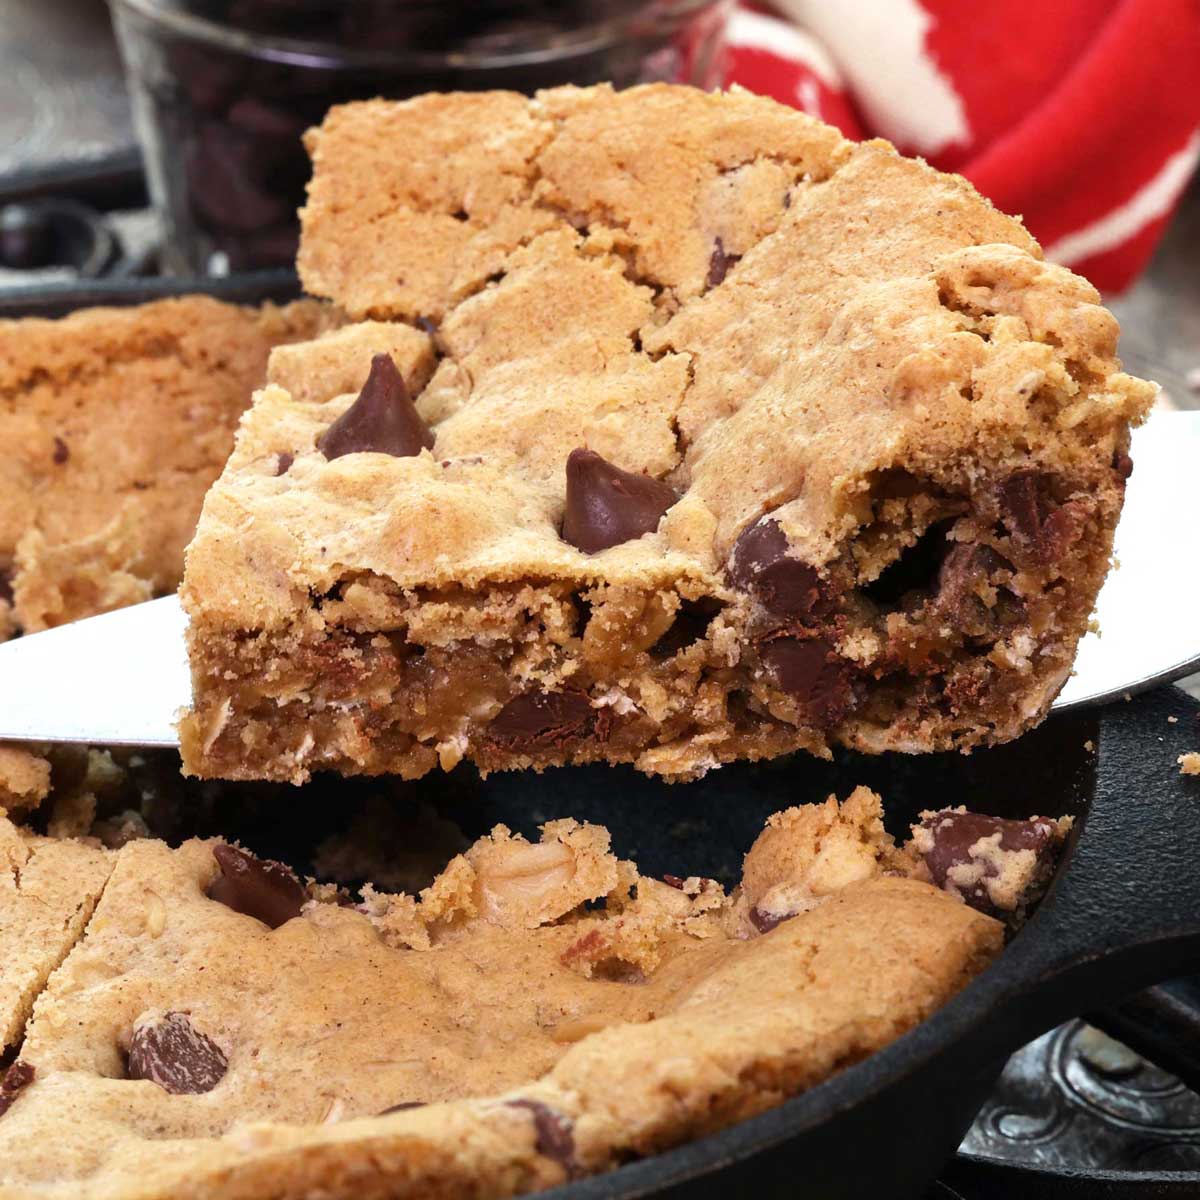 https://onedishkitchen.com/wp-content/uploads/2021/10/oatmeal-chocolate-chip-skillet-cookie-one-dish-kitchen-square-1200.jpg